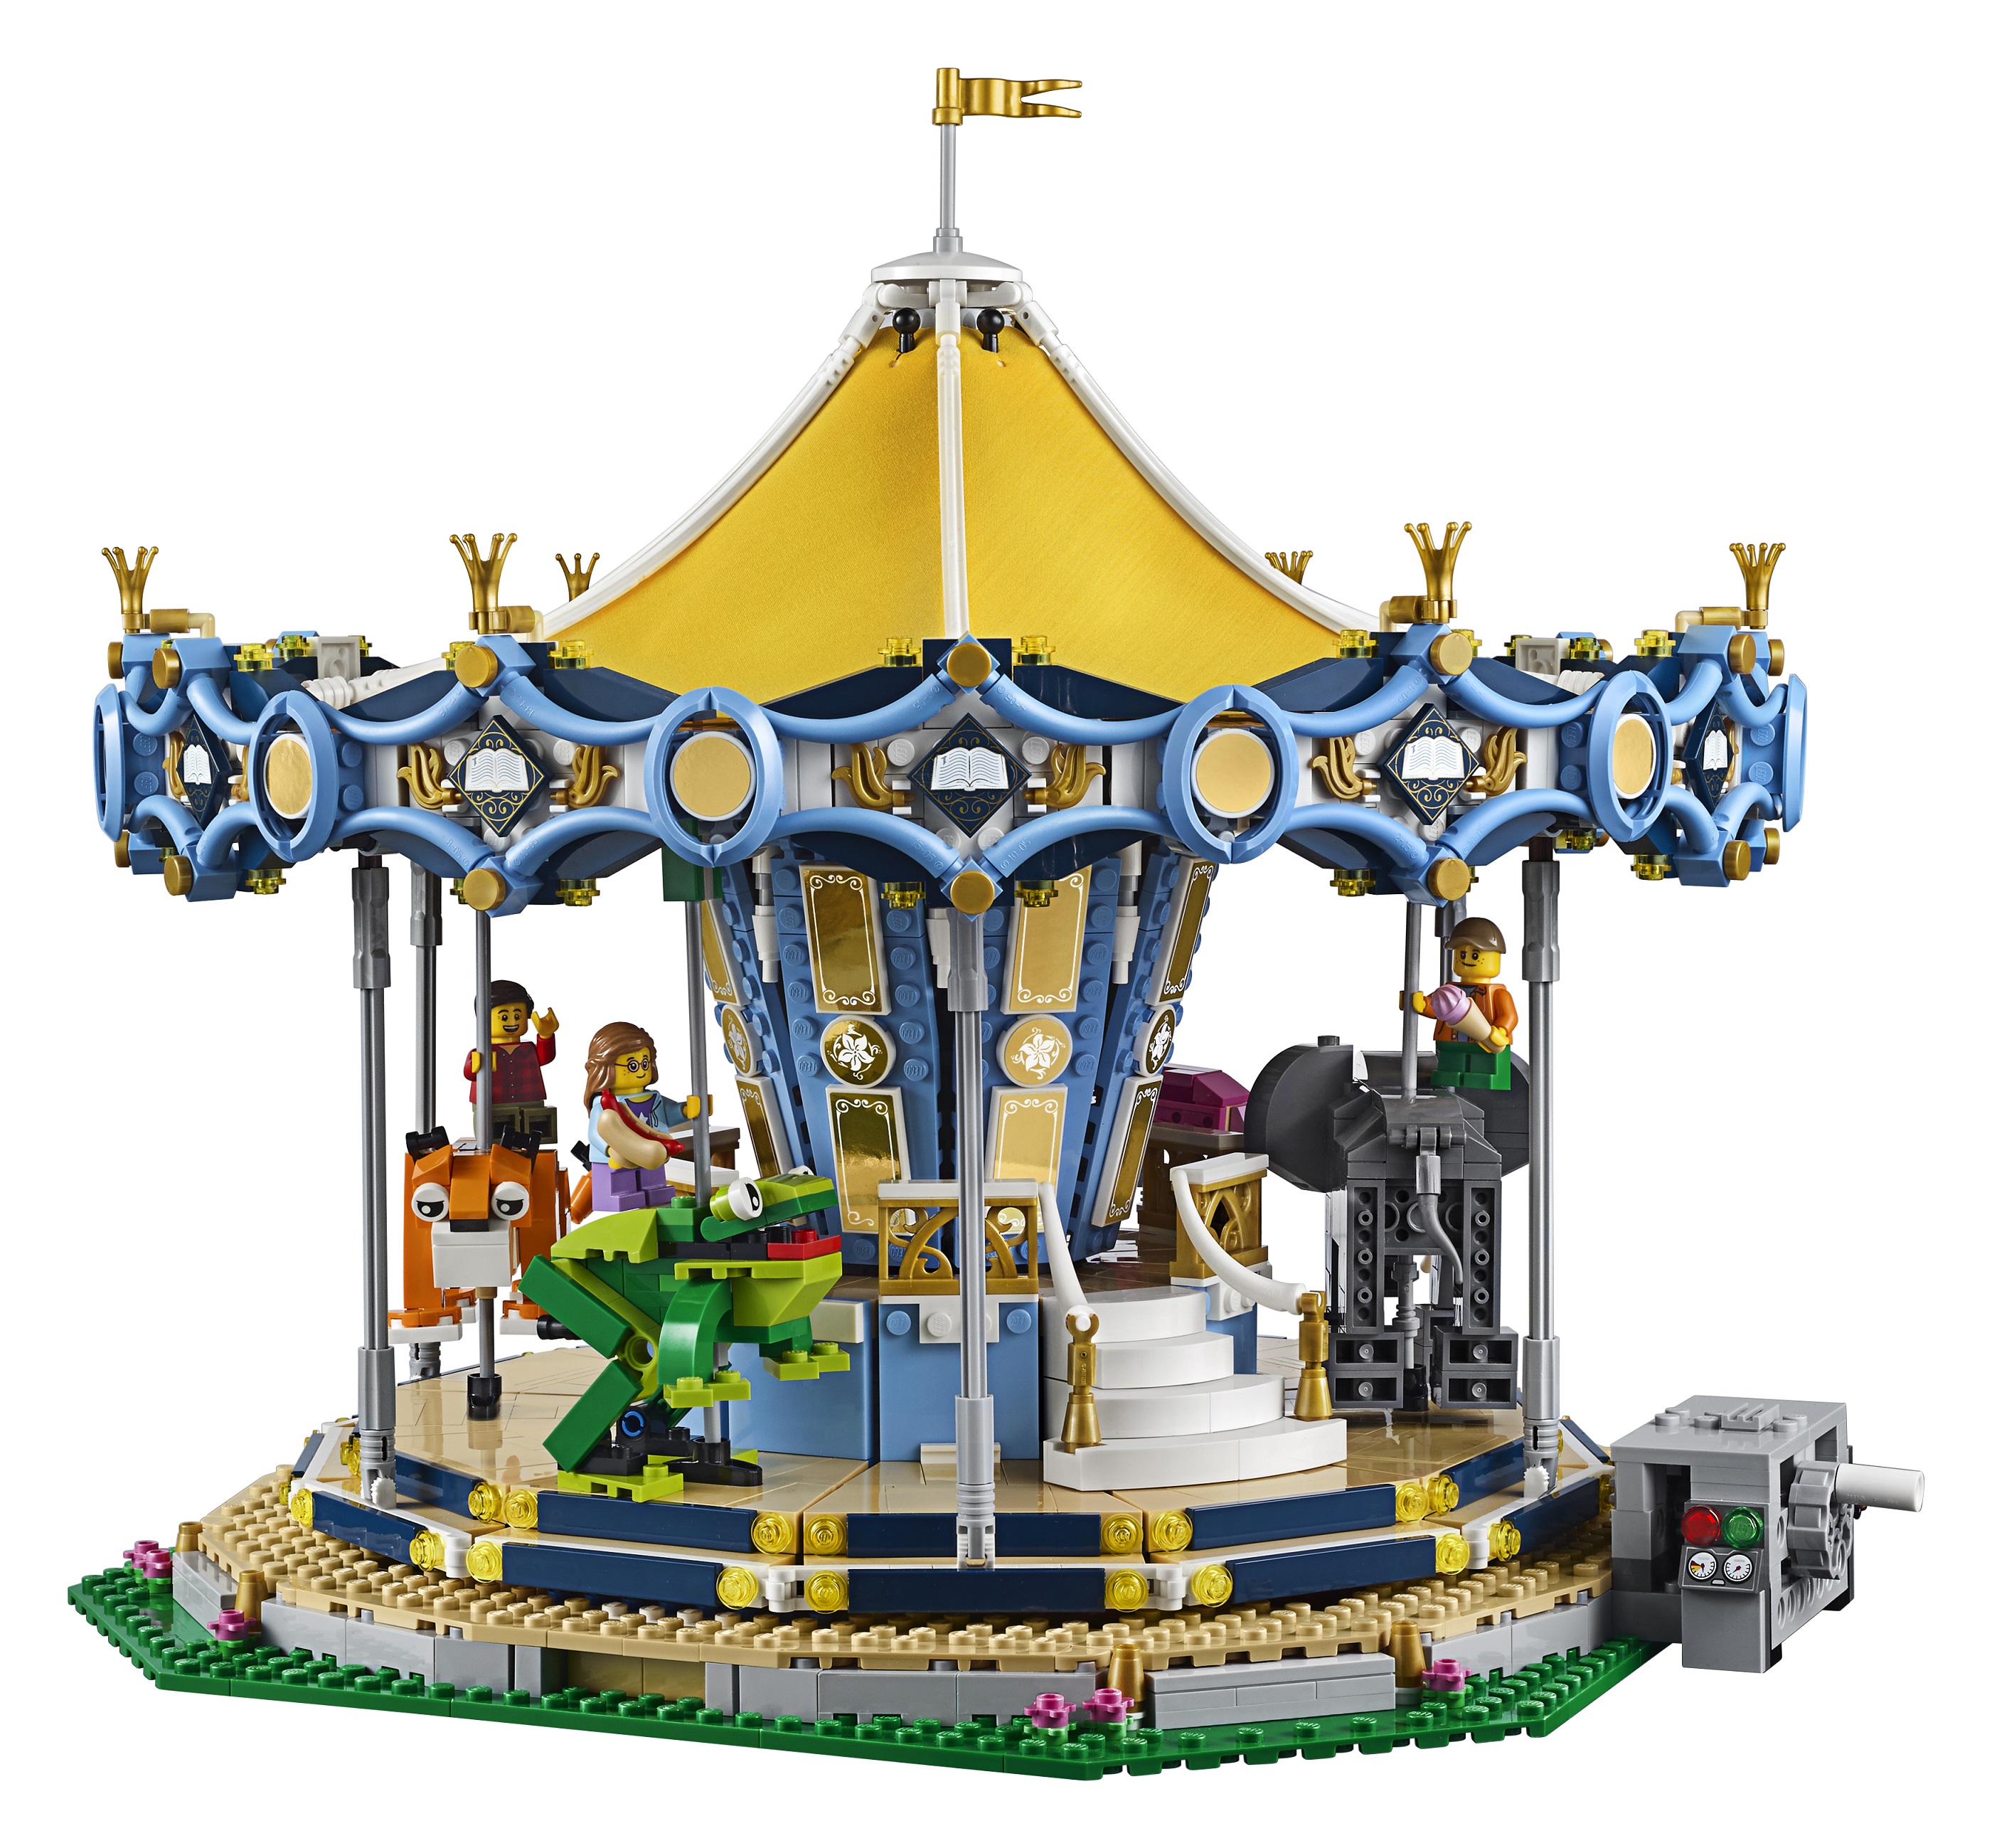 Lego Creator Carousel Is The Latest Attraction At The Lego Fairground Jay S Brick Blog